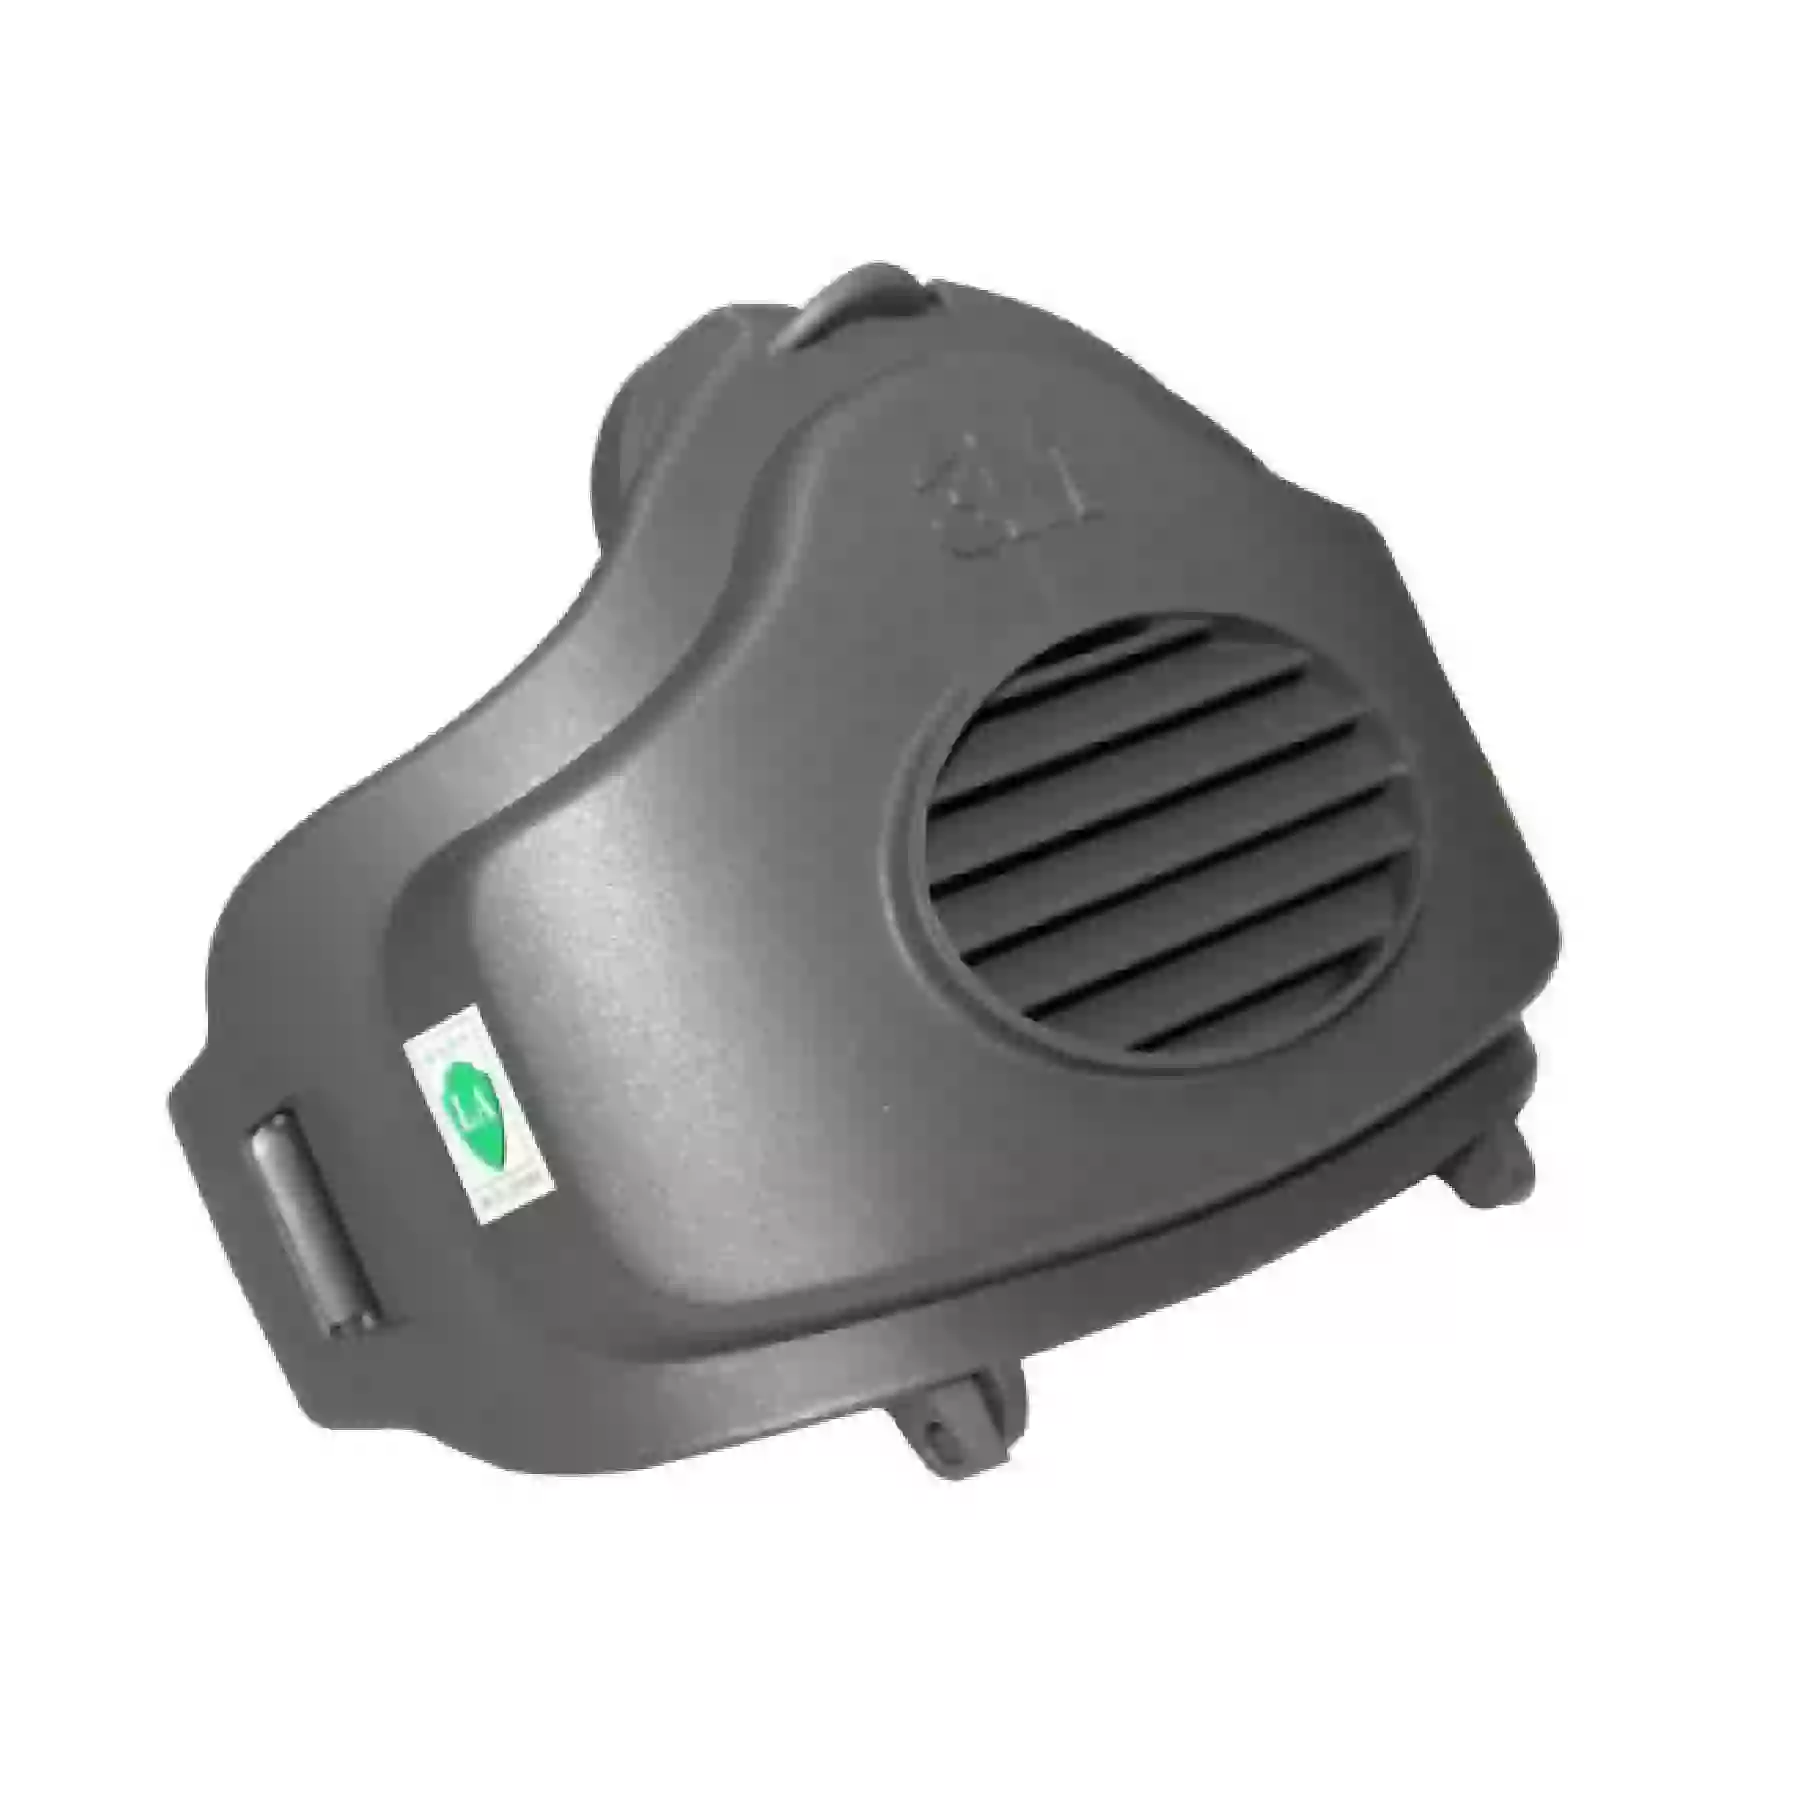 3M 3700 Filter Cover